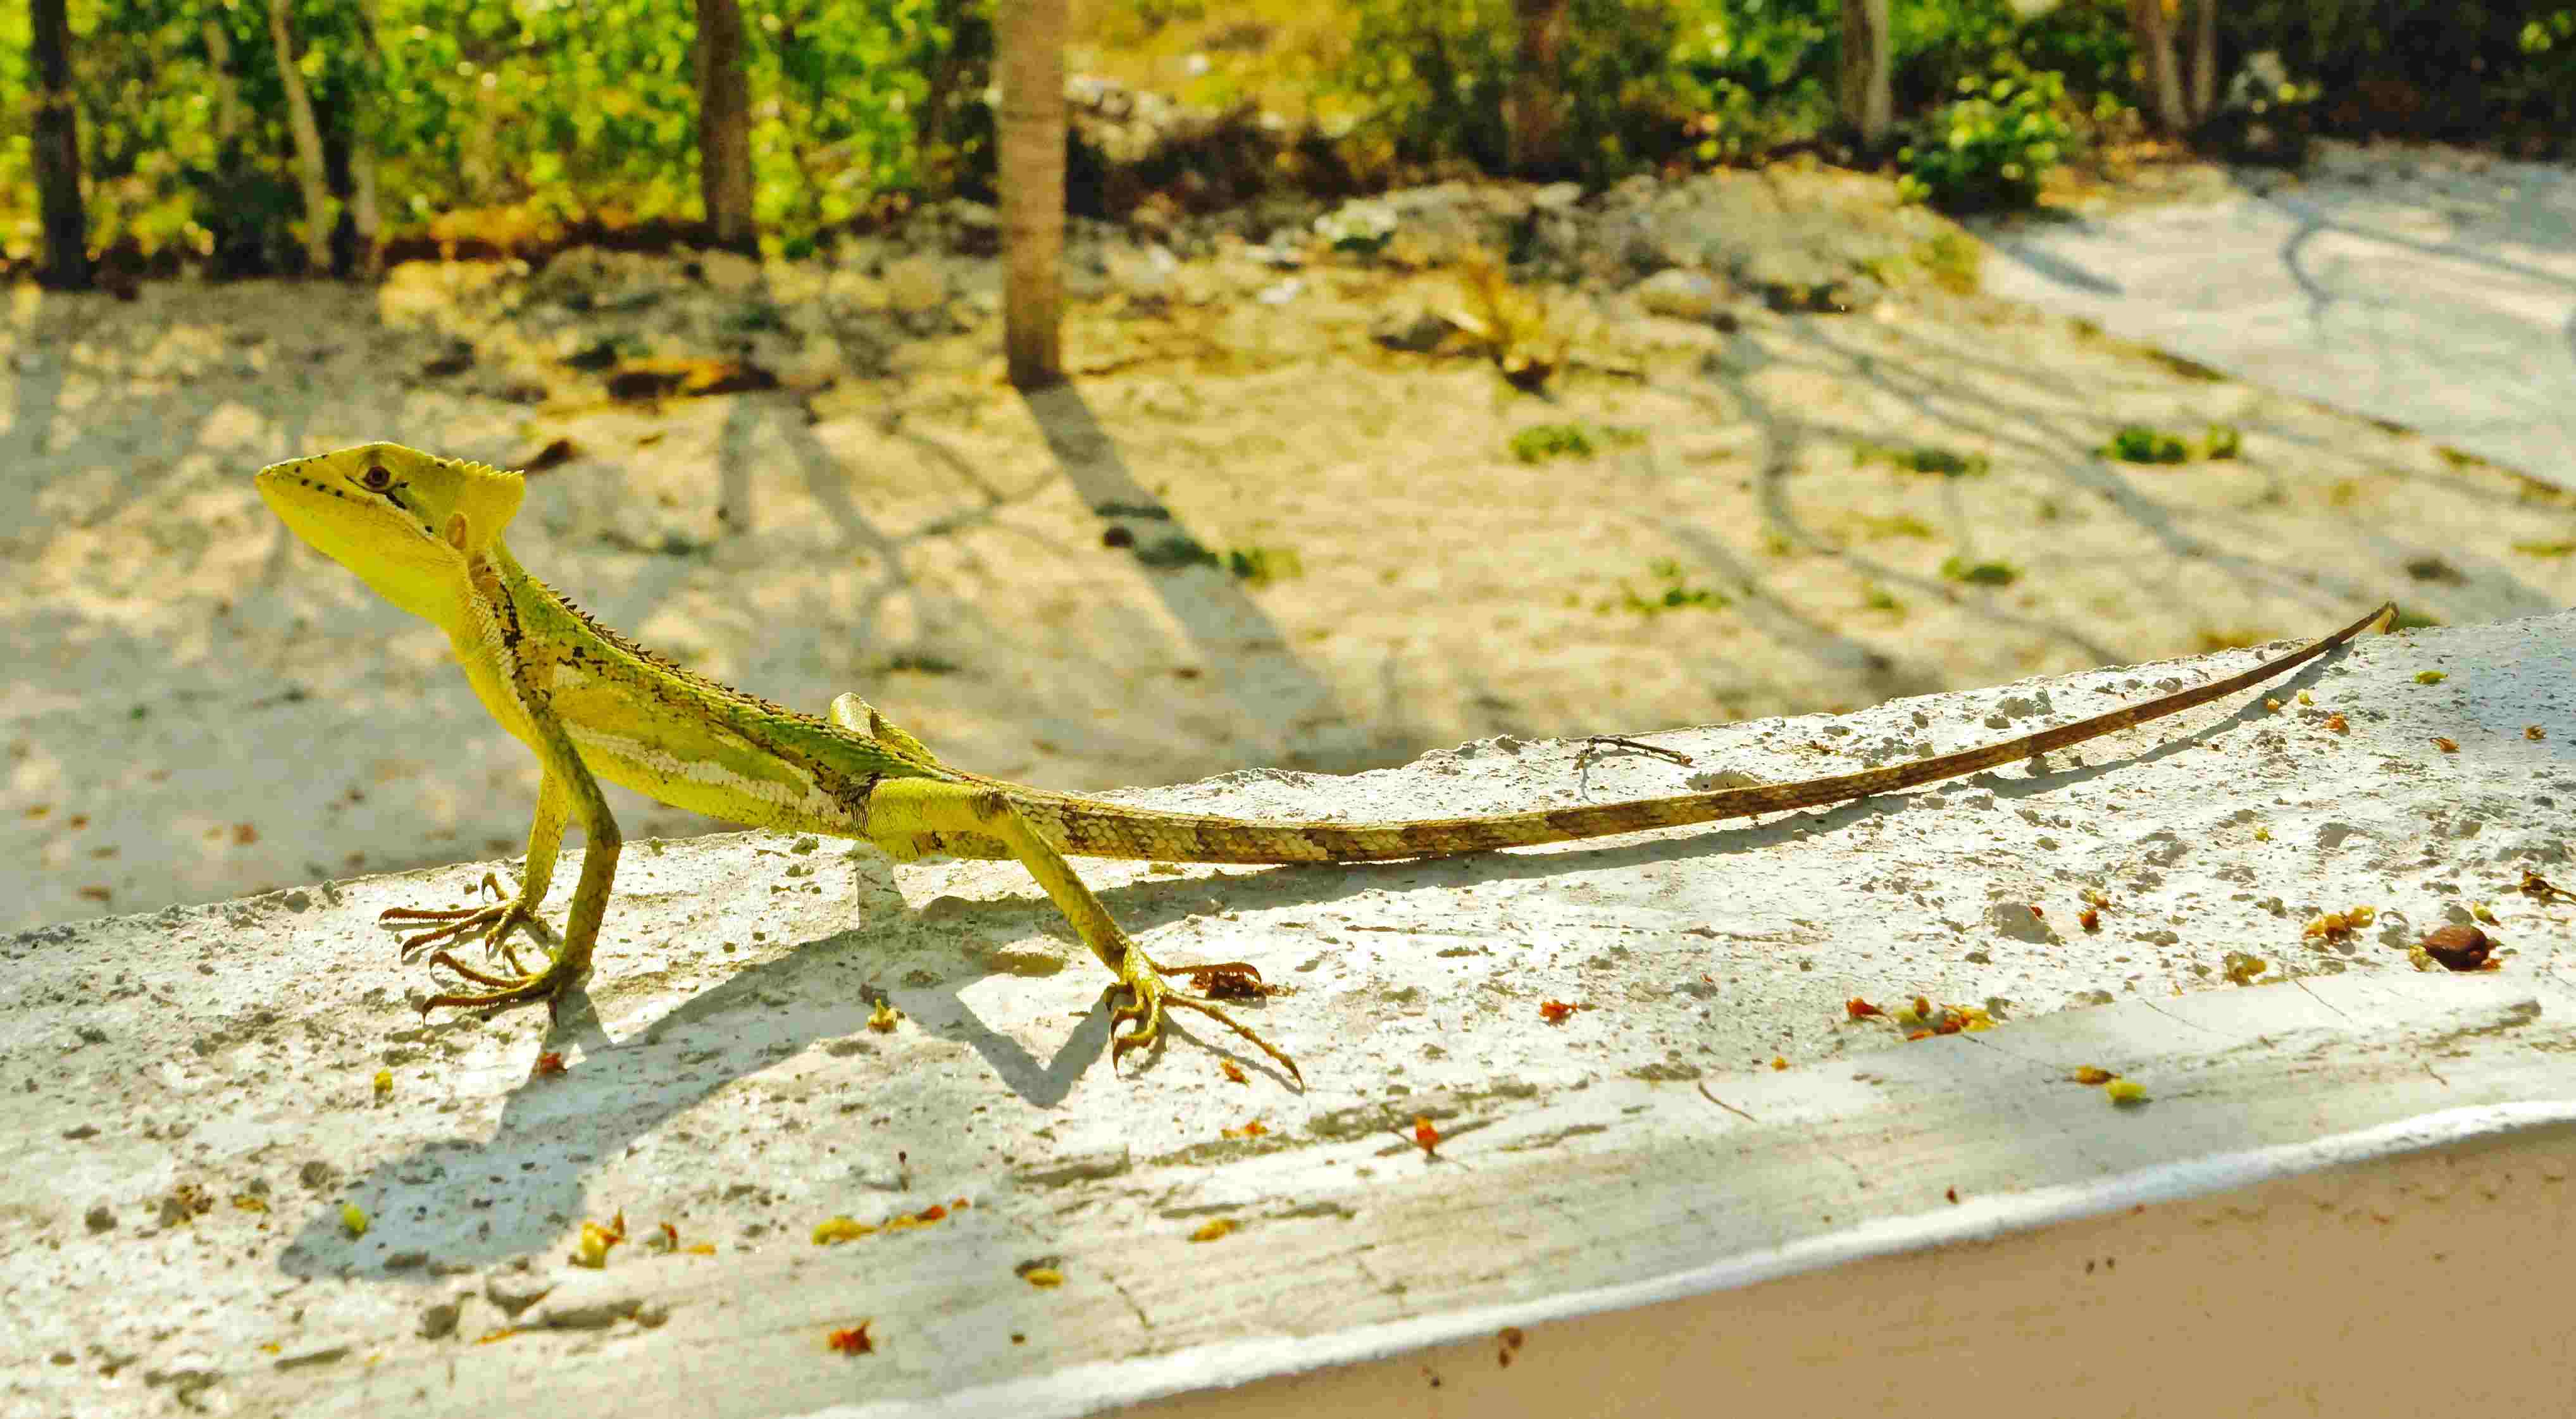 Where To Find Lizards In Your Backyard